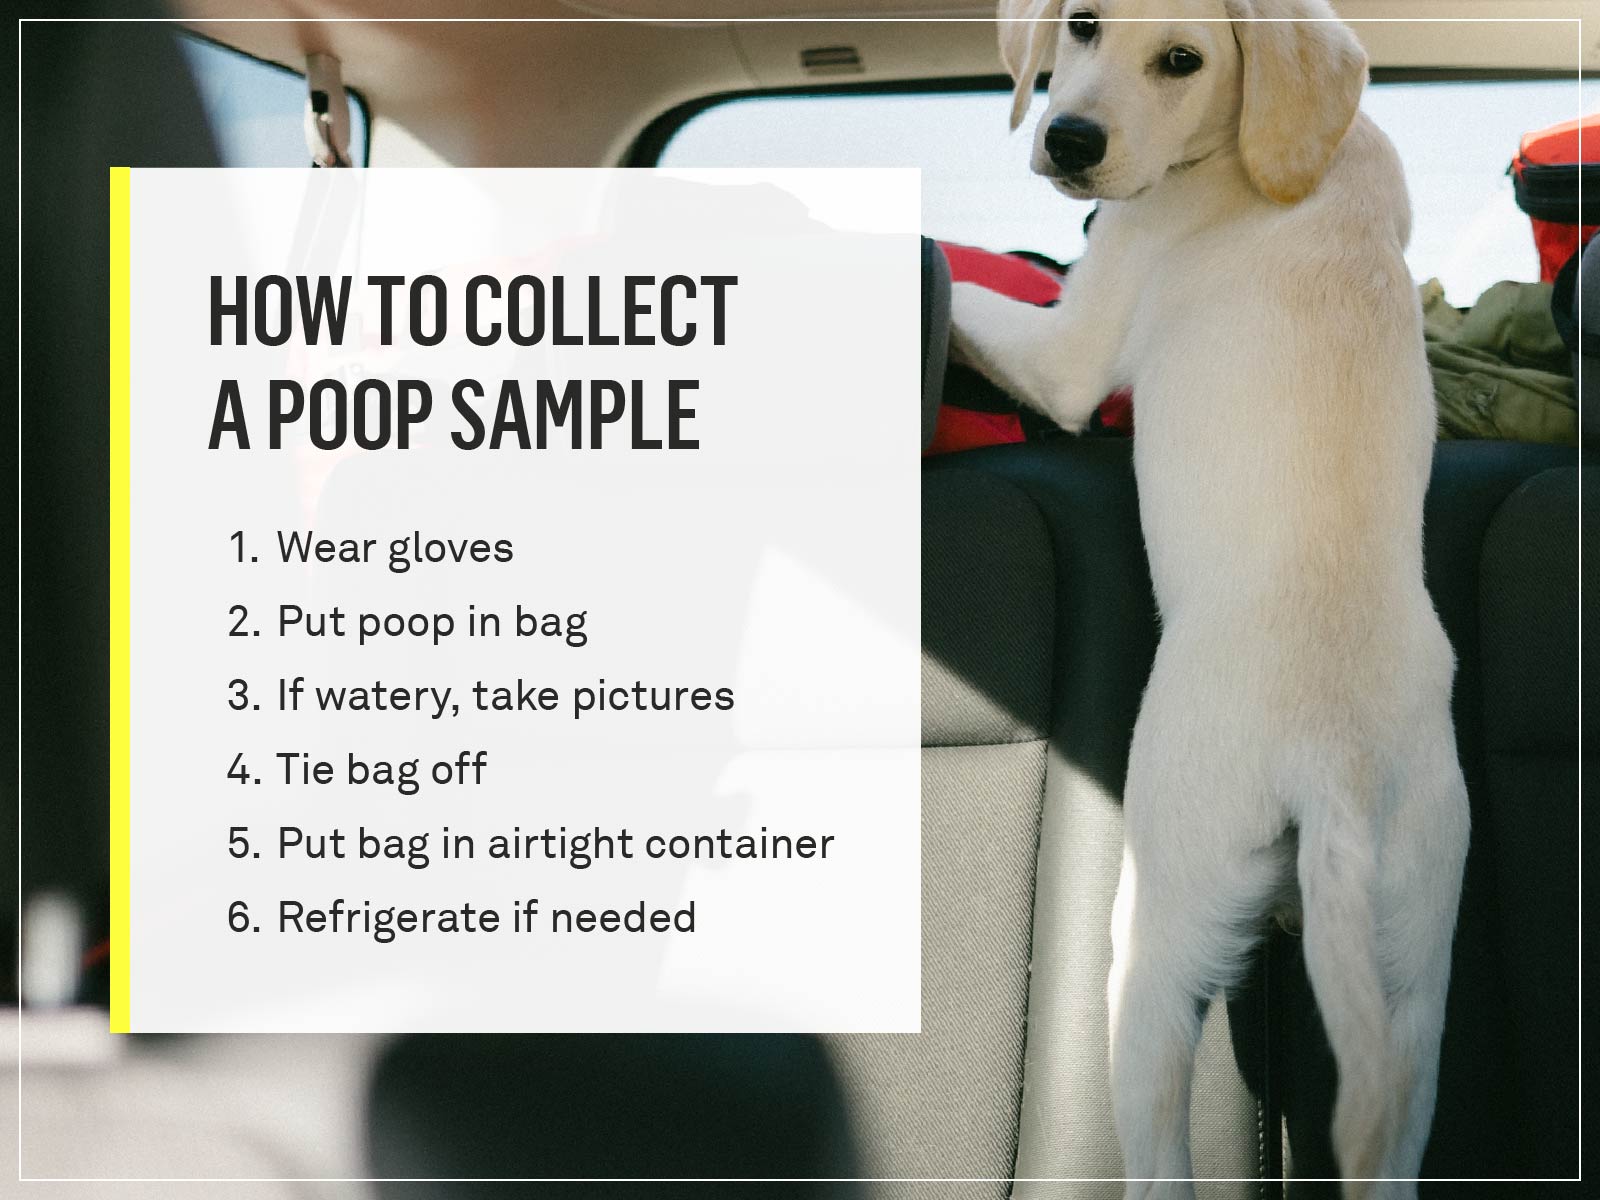 what can i give my dog to make it poop